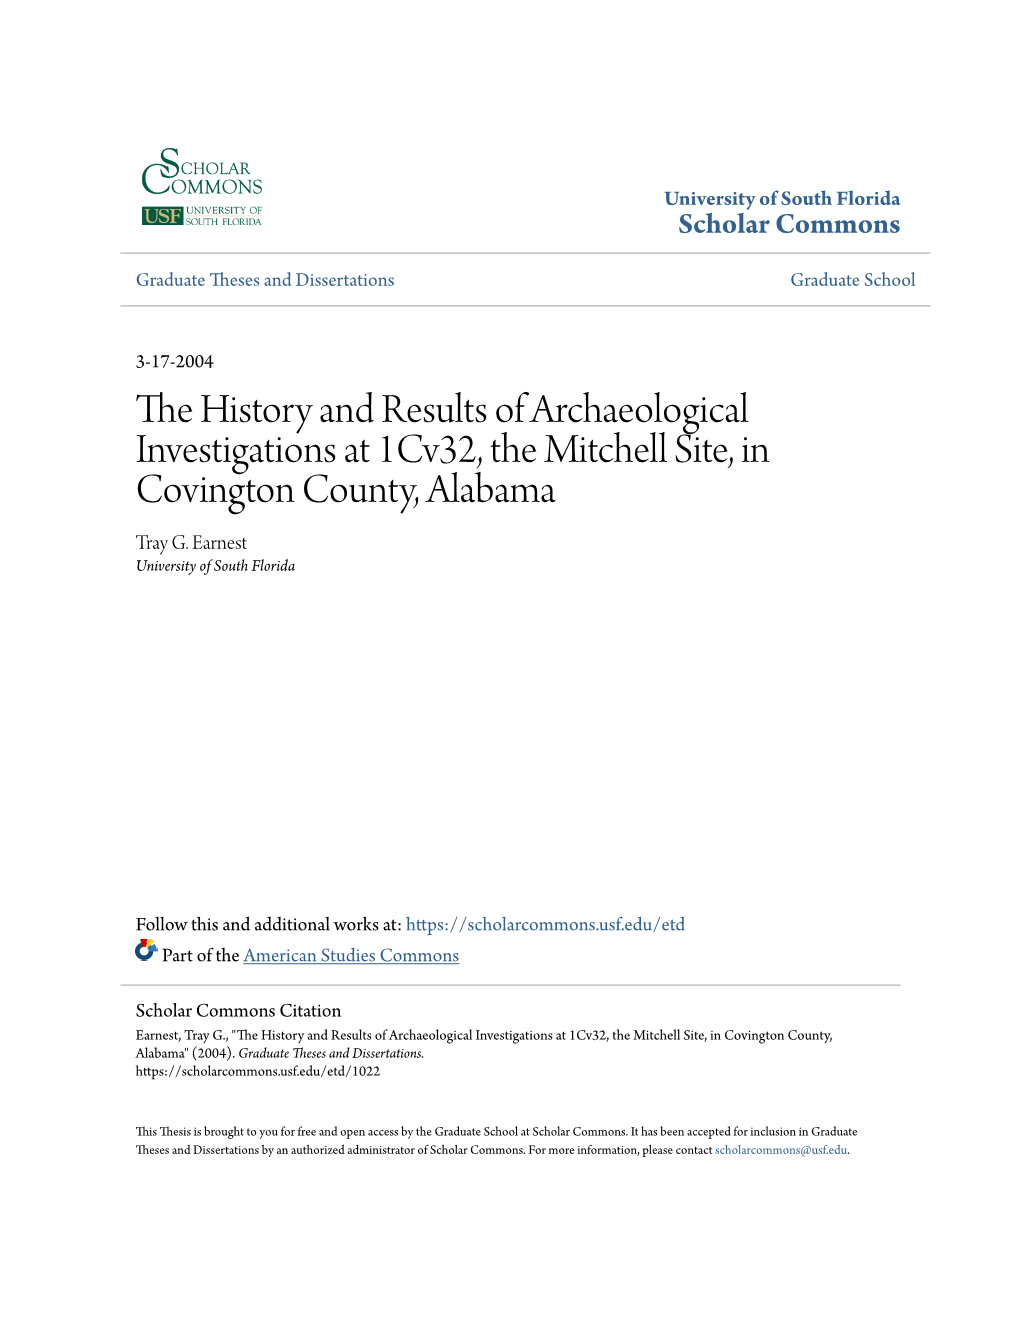 The History and Results of Archaeological Investigations at 1Cv32, the Mitchell Site